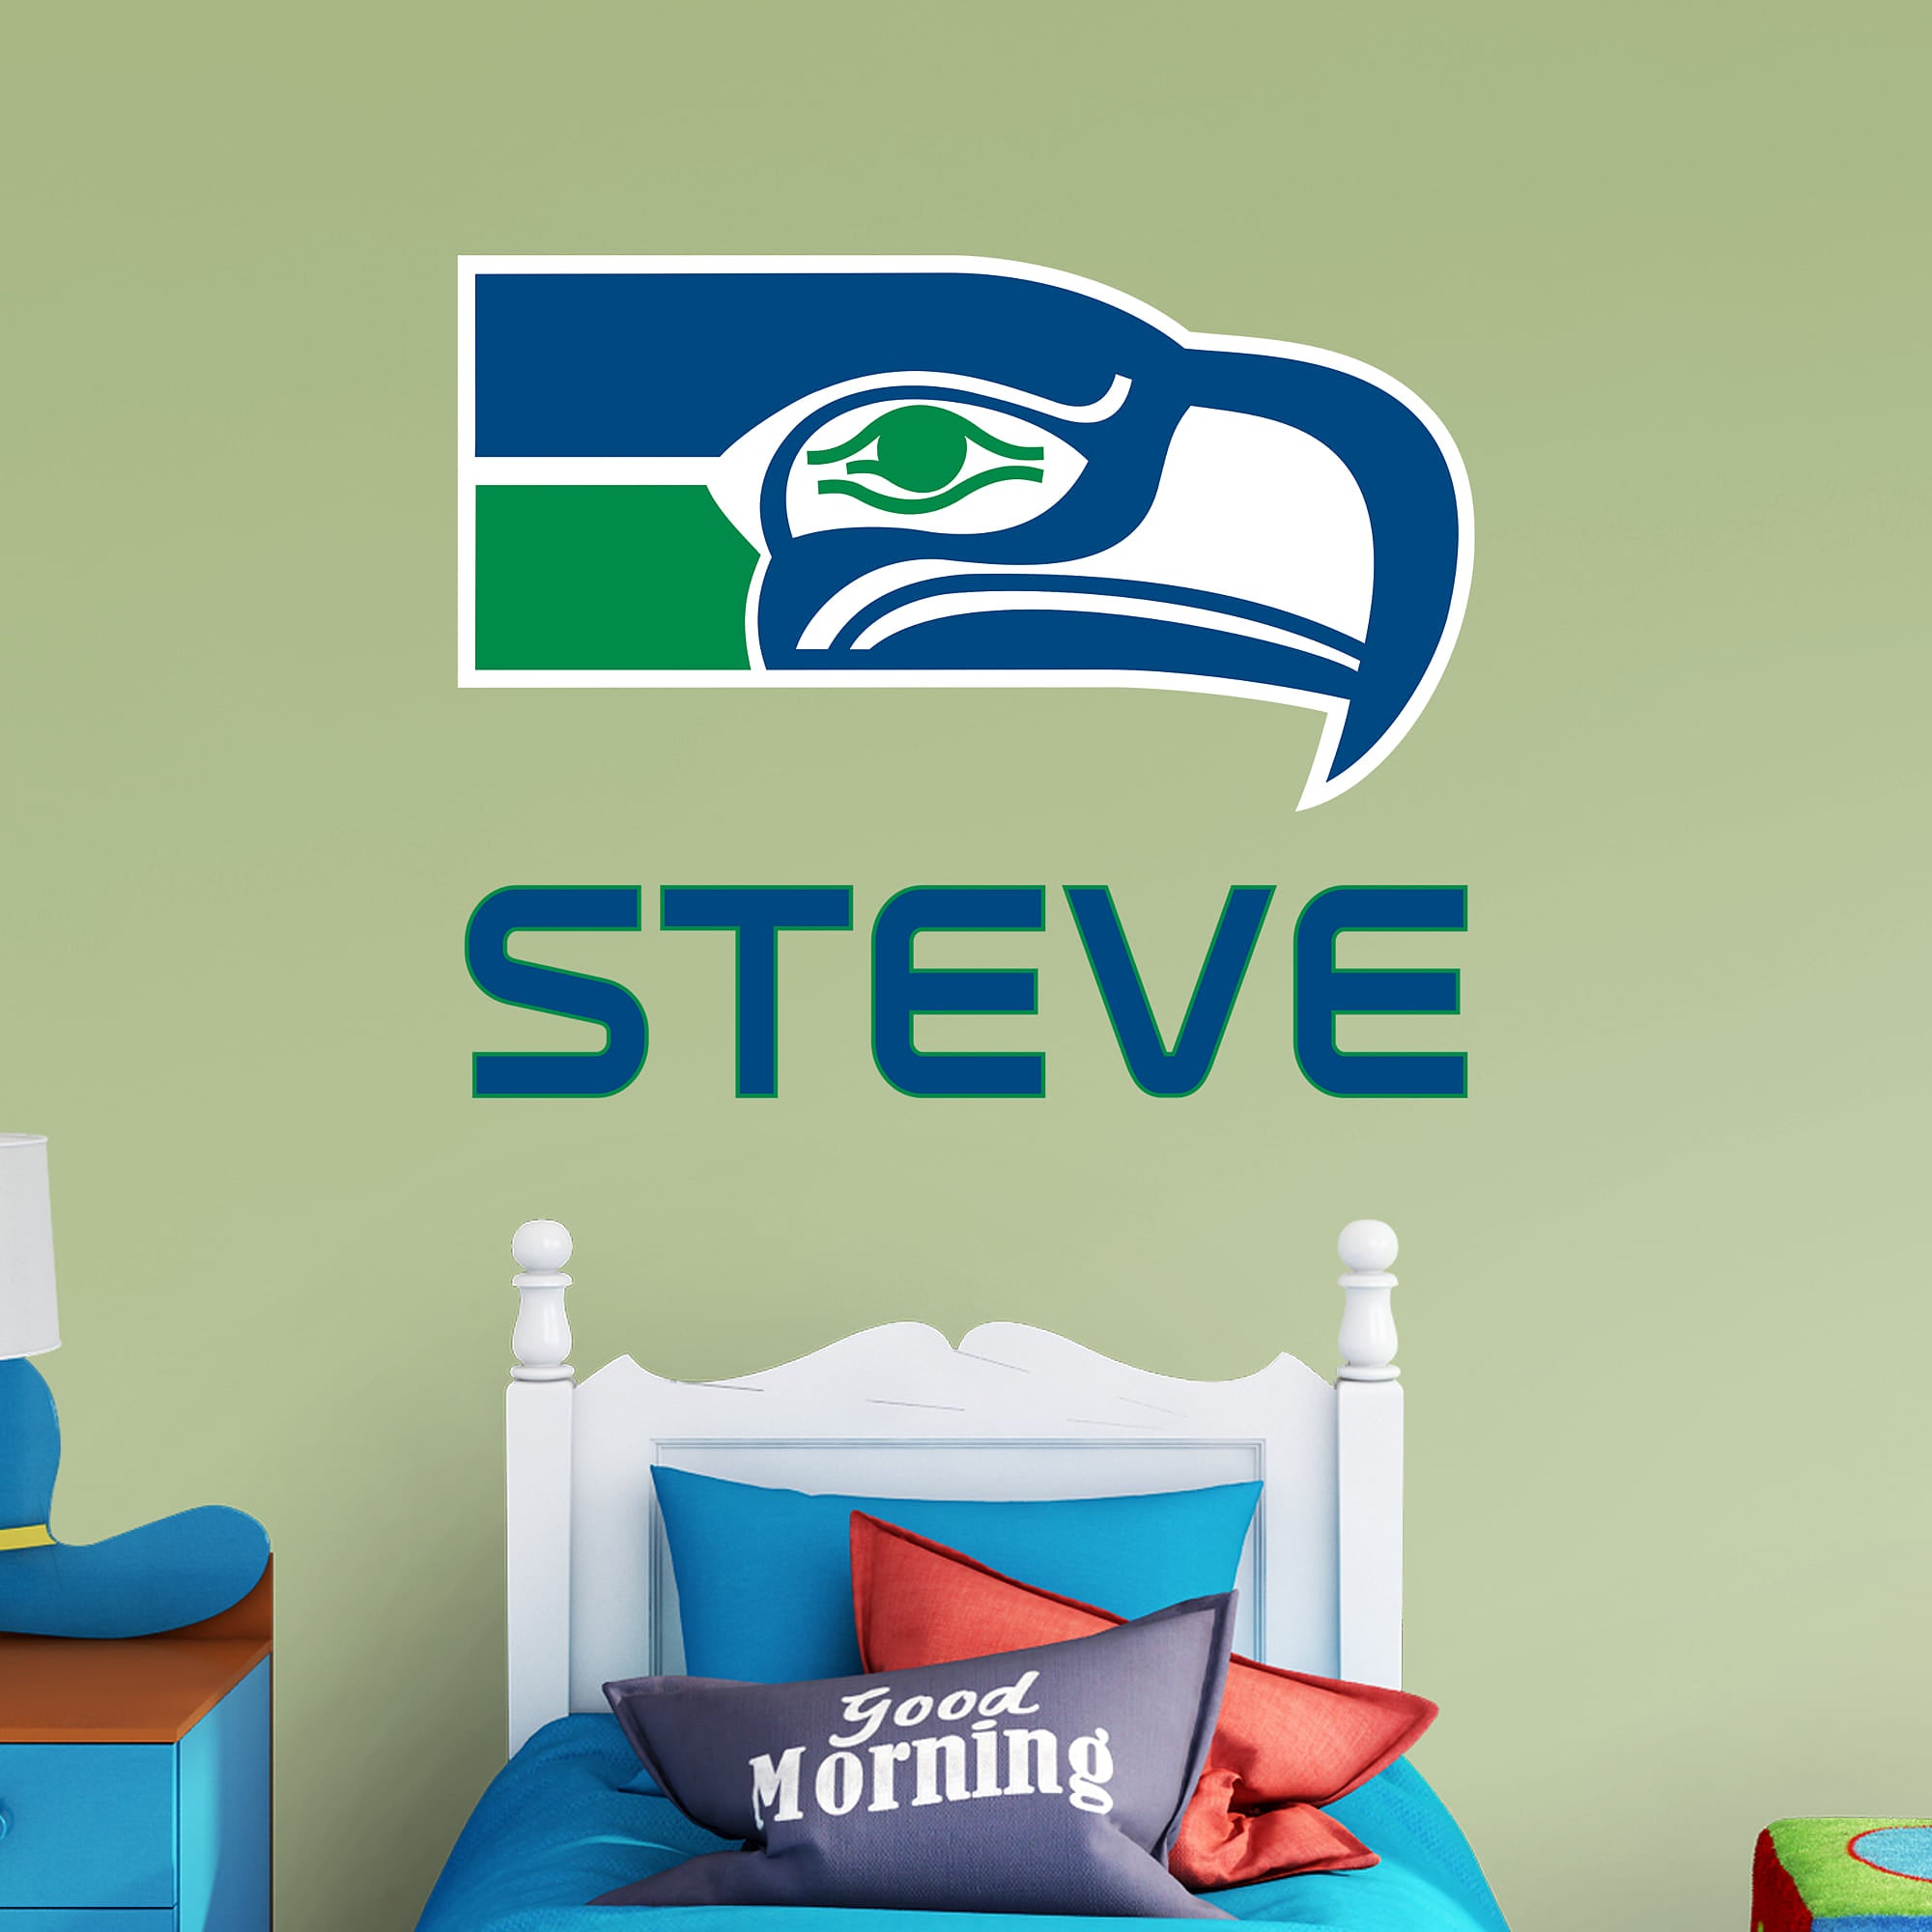 Seattle Seahawks: Classic Stacked Personalized Name - Officially Licensed NFL Transfer Decal in Blue (52"W x 39.5"H) by Fathead